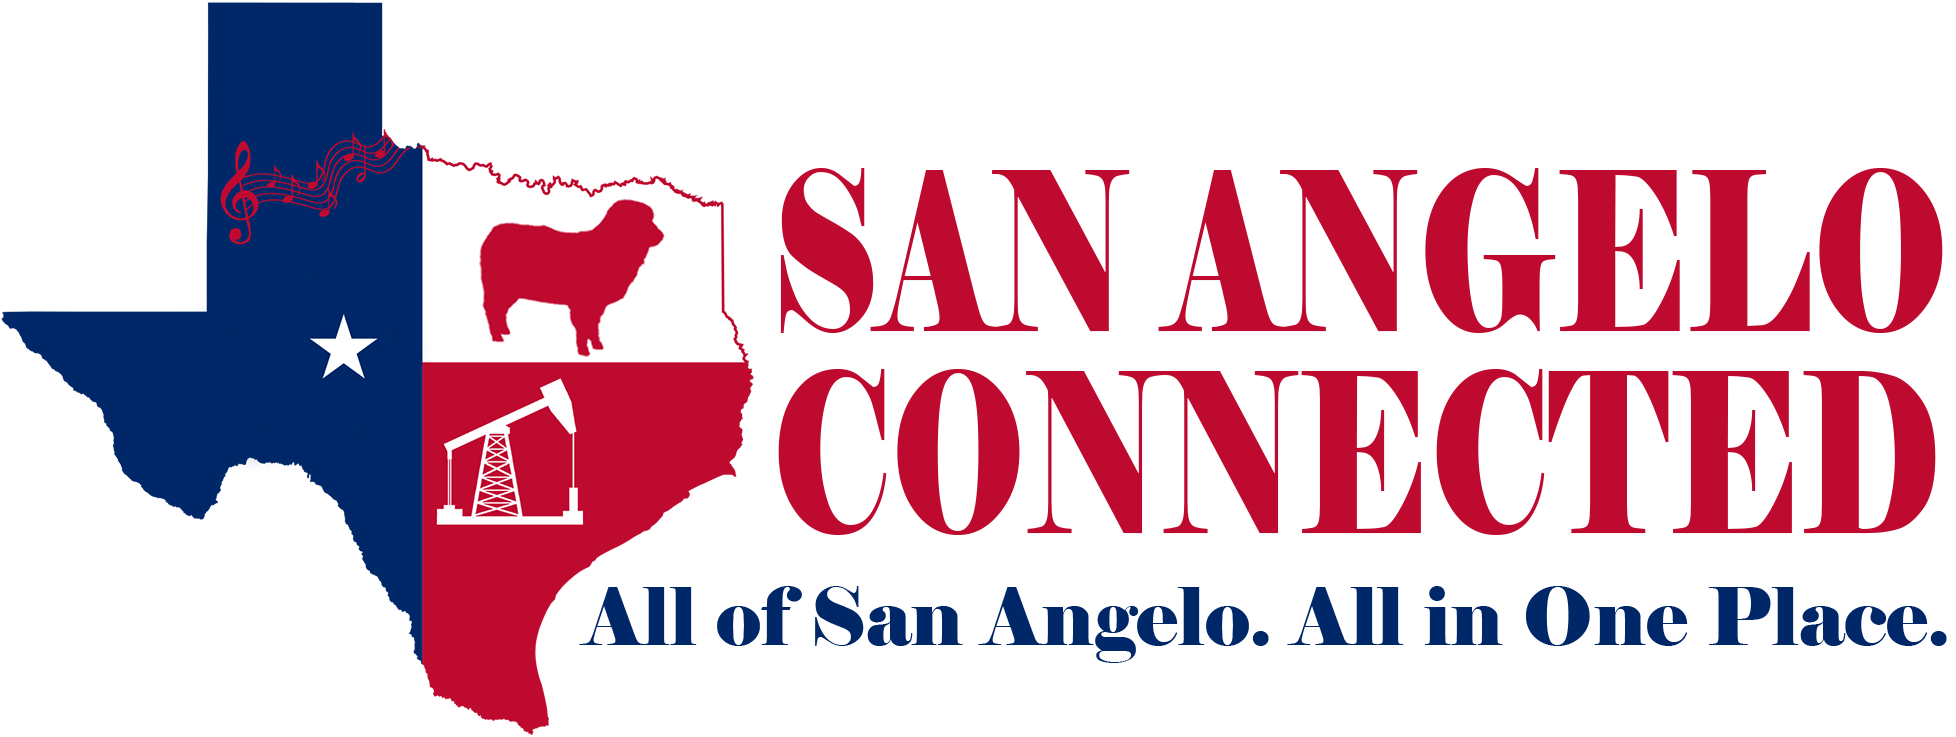 San Angelo Connected by For The Brave LLC